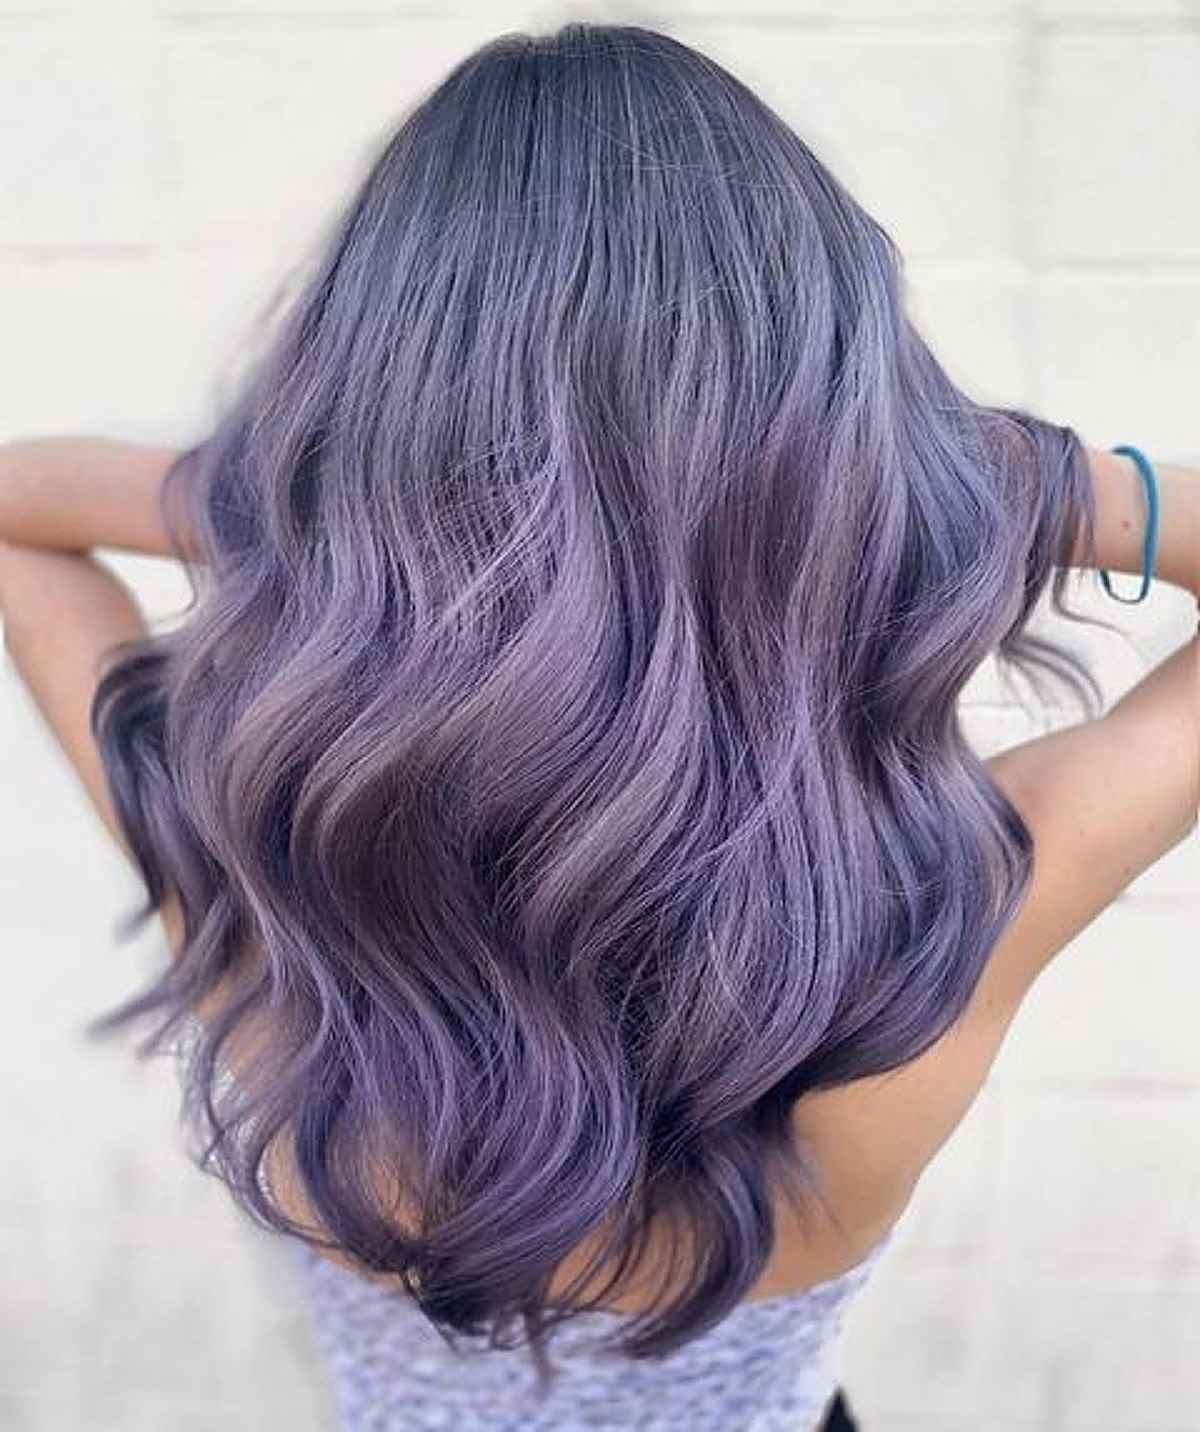 Lilac Hair with Faded Shadow Roots